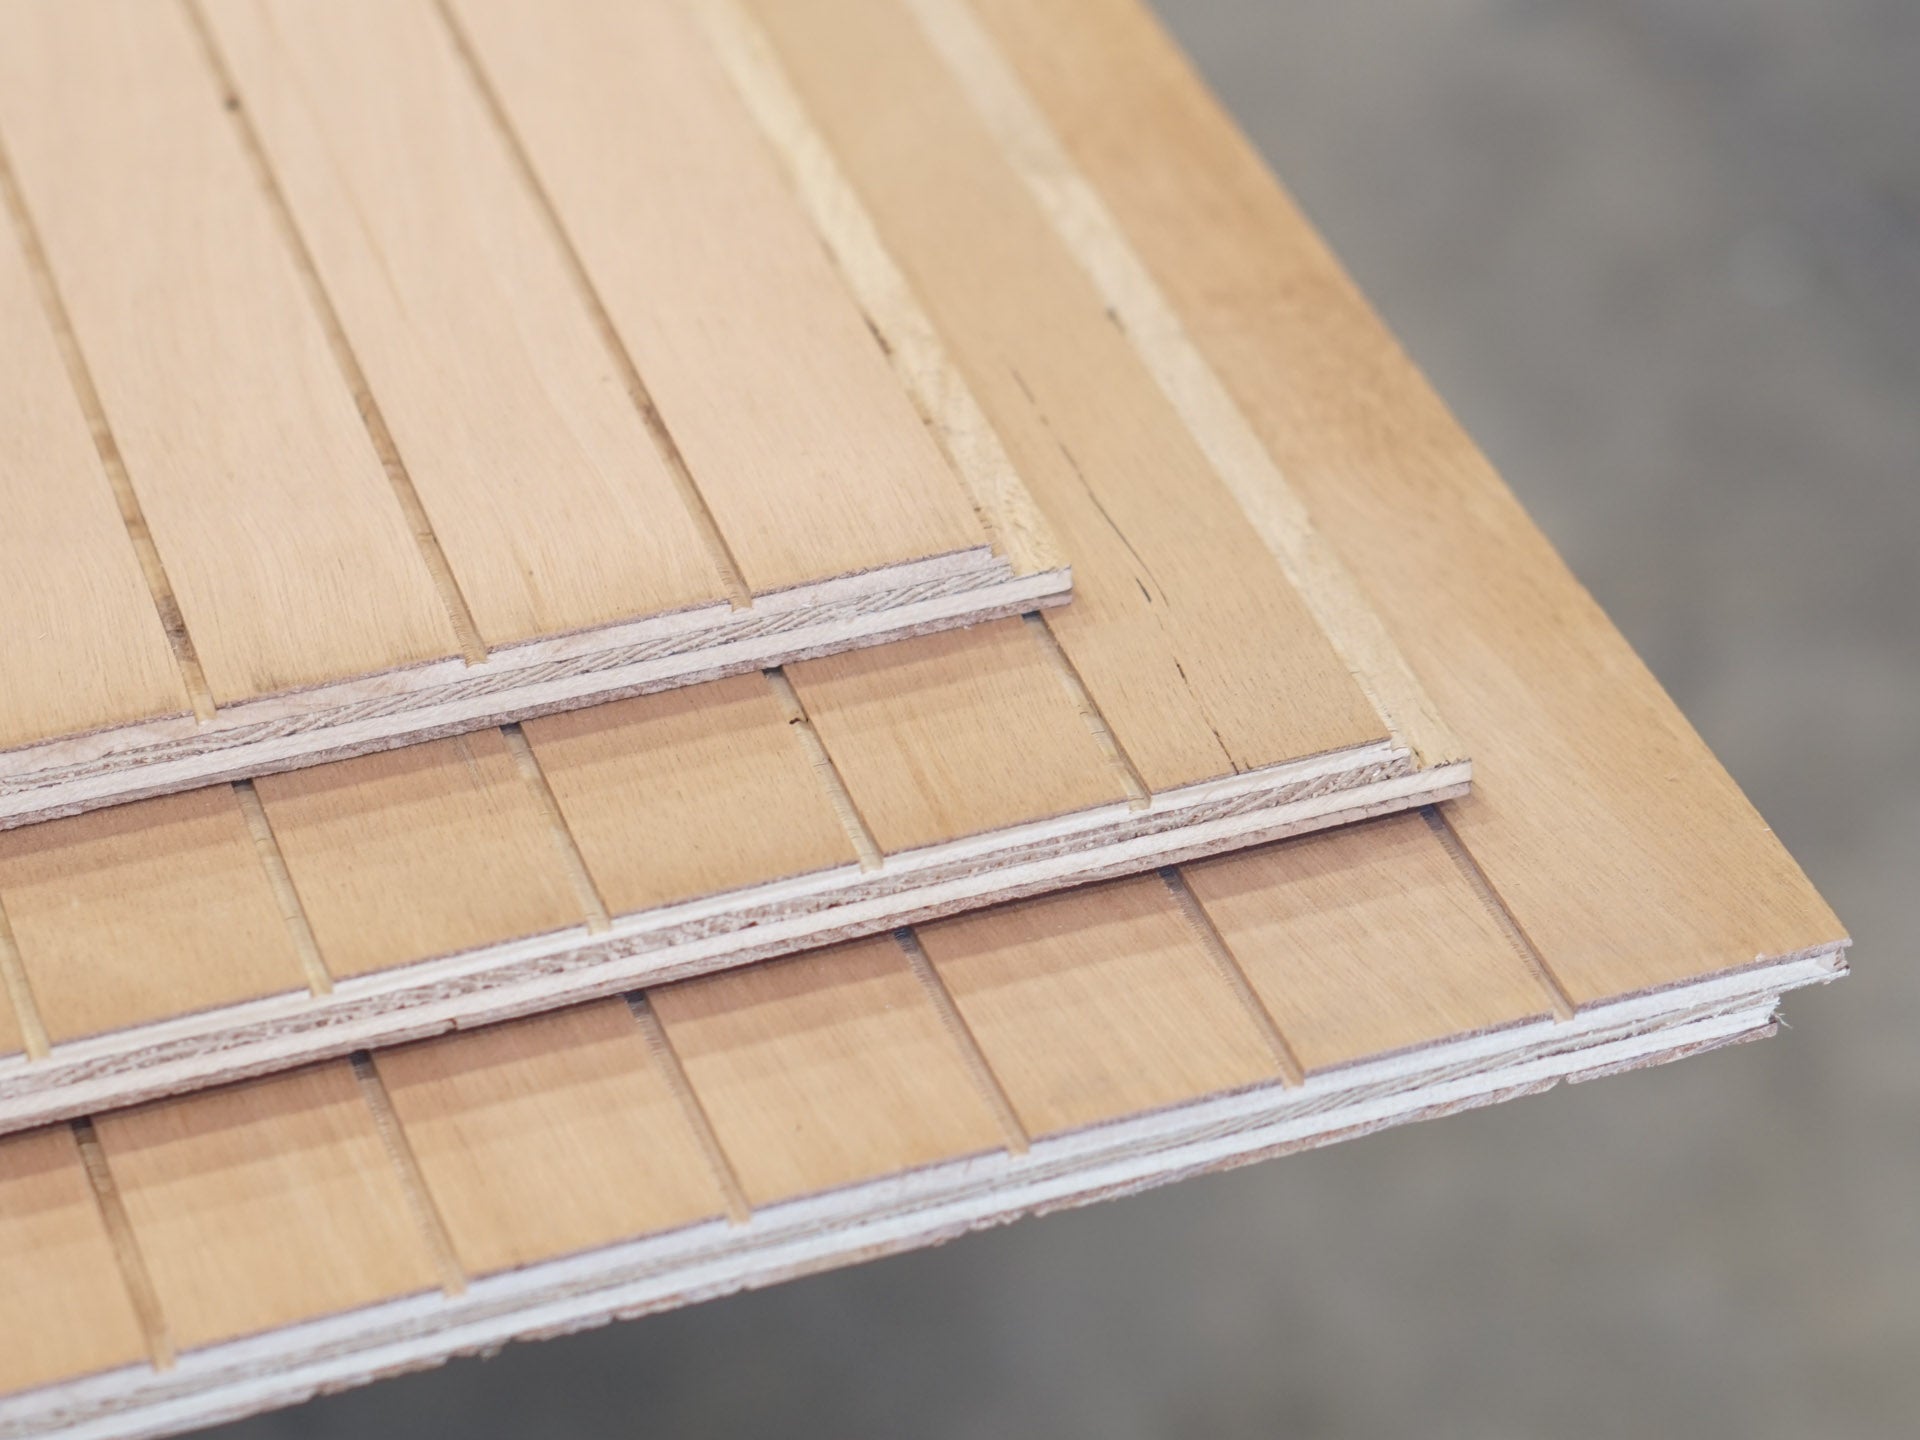 Closeup of three sheets of Thinline patterned plywood consisting of a 1/8” grooves, 1⅝” on center, commonly used as siding and paneling on Eichler homes and other mid-century modern design